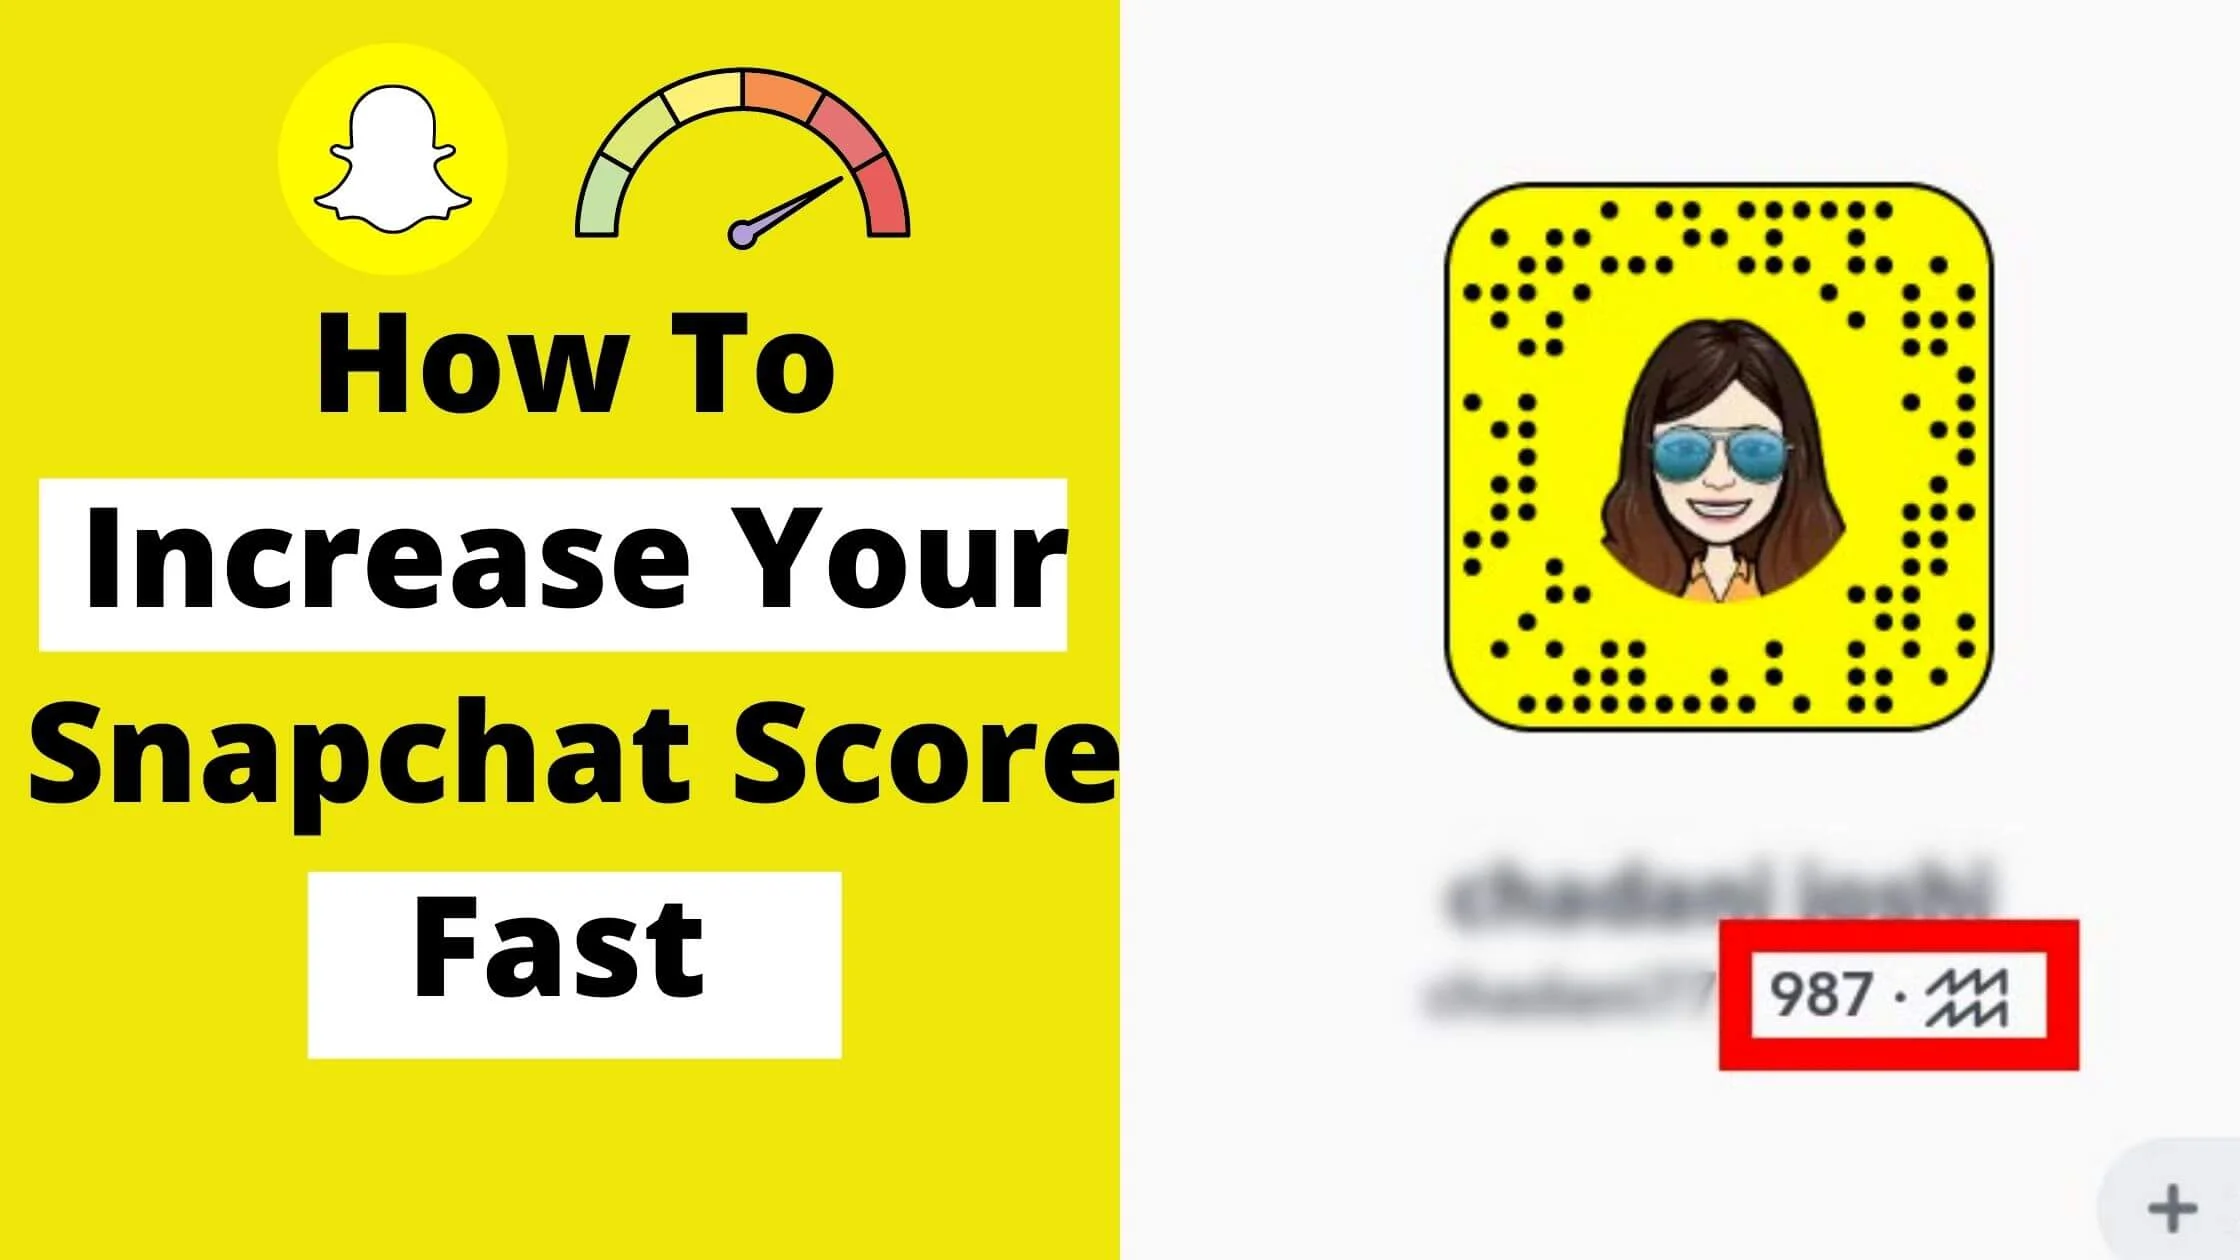 How To Increase Your Snapchat Score Fast